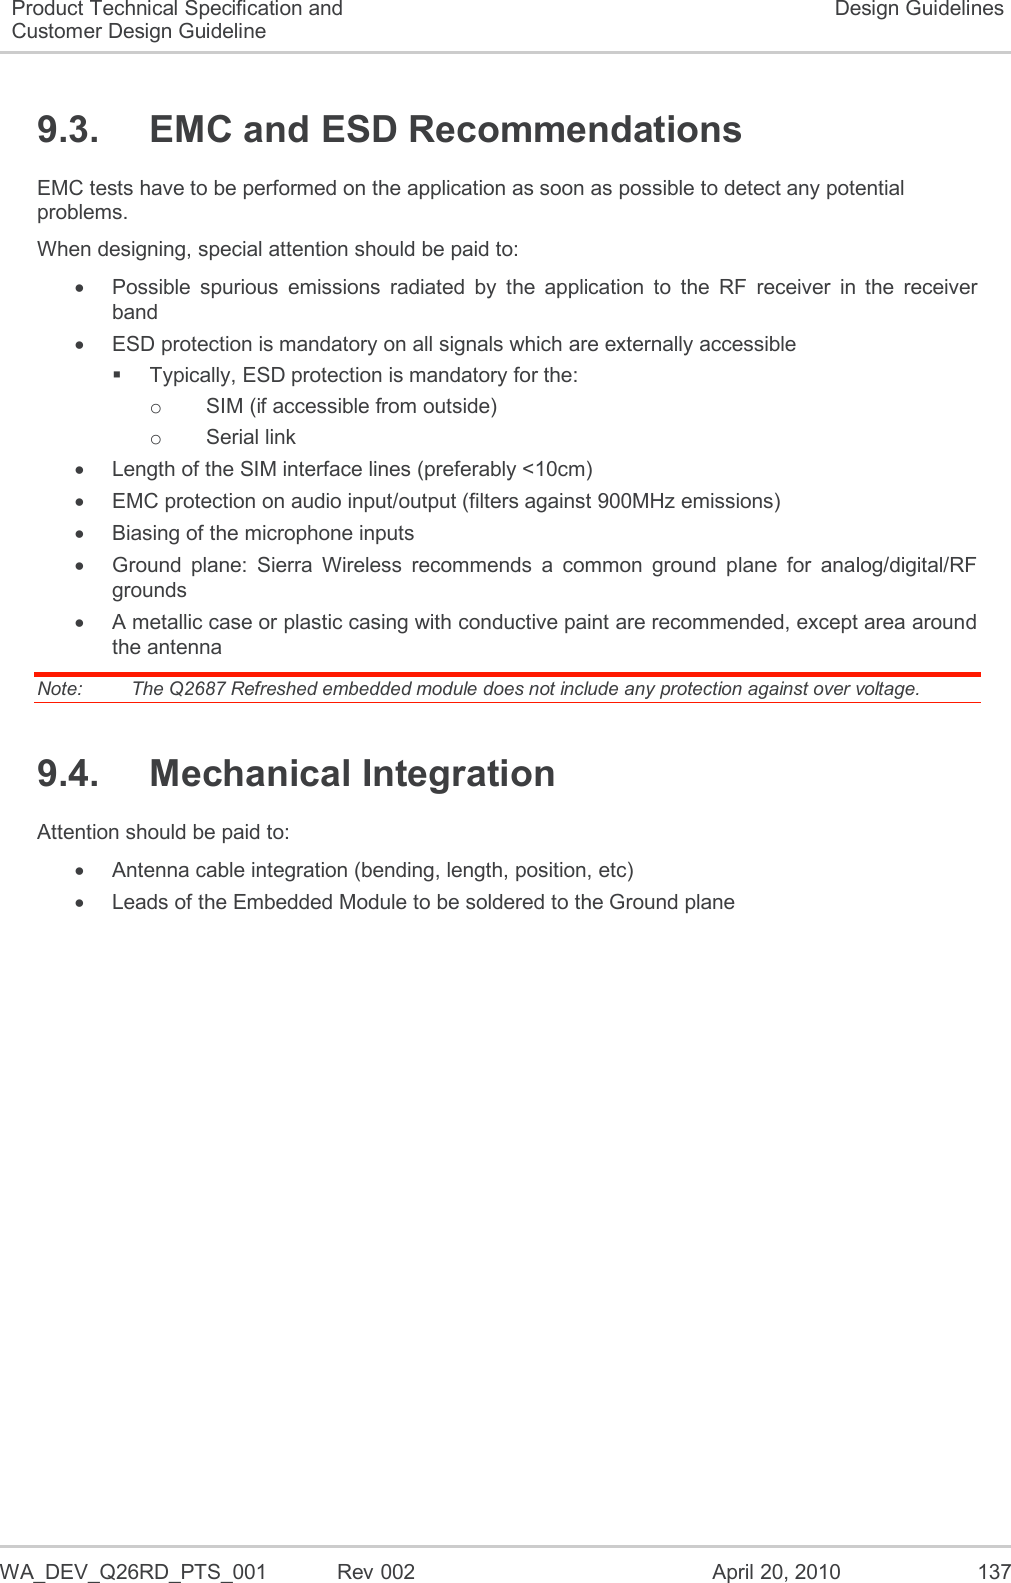   WA_DEV_Q26RD_PTS_001  Rev 002  April 20, 2010 137 Product Technical Specification and Customer Design Guideline Design Guidelines 9.3.  EMC and ESD Recommendations EMC tests have to be performed on the application as soon as possible to detect any potential problems. When designing, special attention should be paid to:   Possible  spurious  emissions  radiated  by  the  application  to  the  RF  receiver  in  the  receiver band   ESD protection is mandatory on all signals which are externally accessible   Typically, ESD protection is mandatory for the: o  SIM (if accessible from outside) o  Serial link   Length of the SIM interface lines (preferably &lt;10cm)   EMC protection on audio input/output (filters against 900MHz emissions)   Biasing of the microphone inputs   Ground  plane:  Sierra  Wireless  recommends  a  common  ground  plane  for  analog/digital/RF grounds   A metallic case or plastic casing with conductive paint are recommended, except area around the antenna Note:   The Q2687 Refreshed embedded module does not include any protection against over voltage. 9.4.  Mechanical Integration Attention should be paid to:   Antenna cable integration (bending, length, position, etc)   Leads of the Embedded Module to be soldered to the Ground plane 